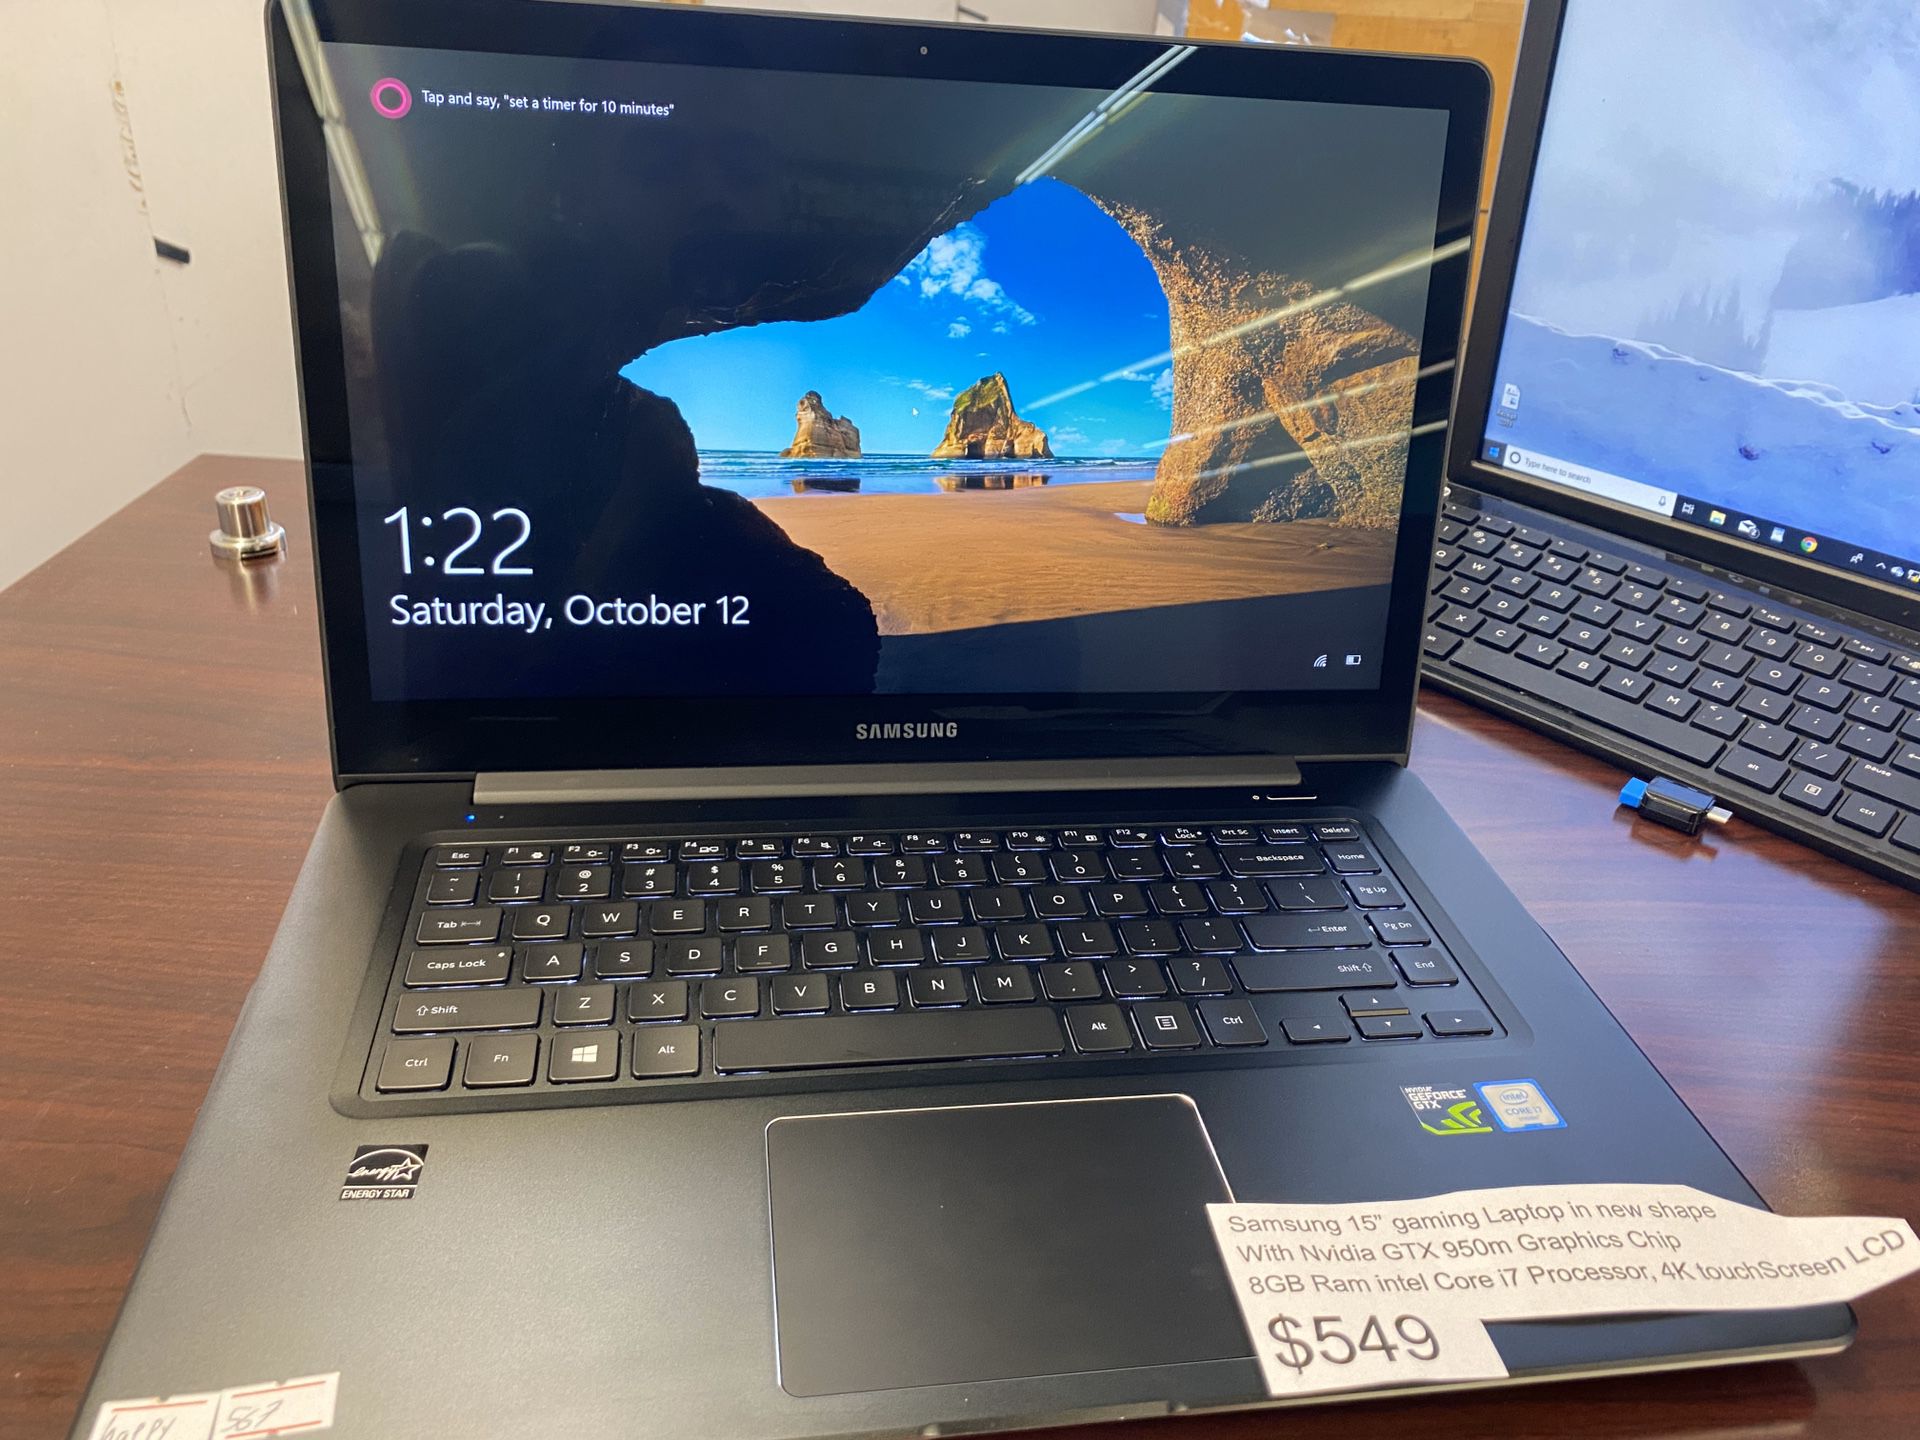 Samsung 15.6” Windows 10 notebook 9 laptop with graphics card